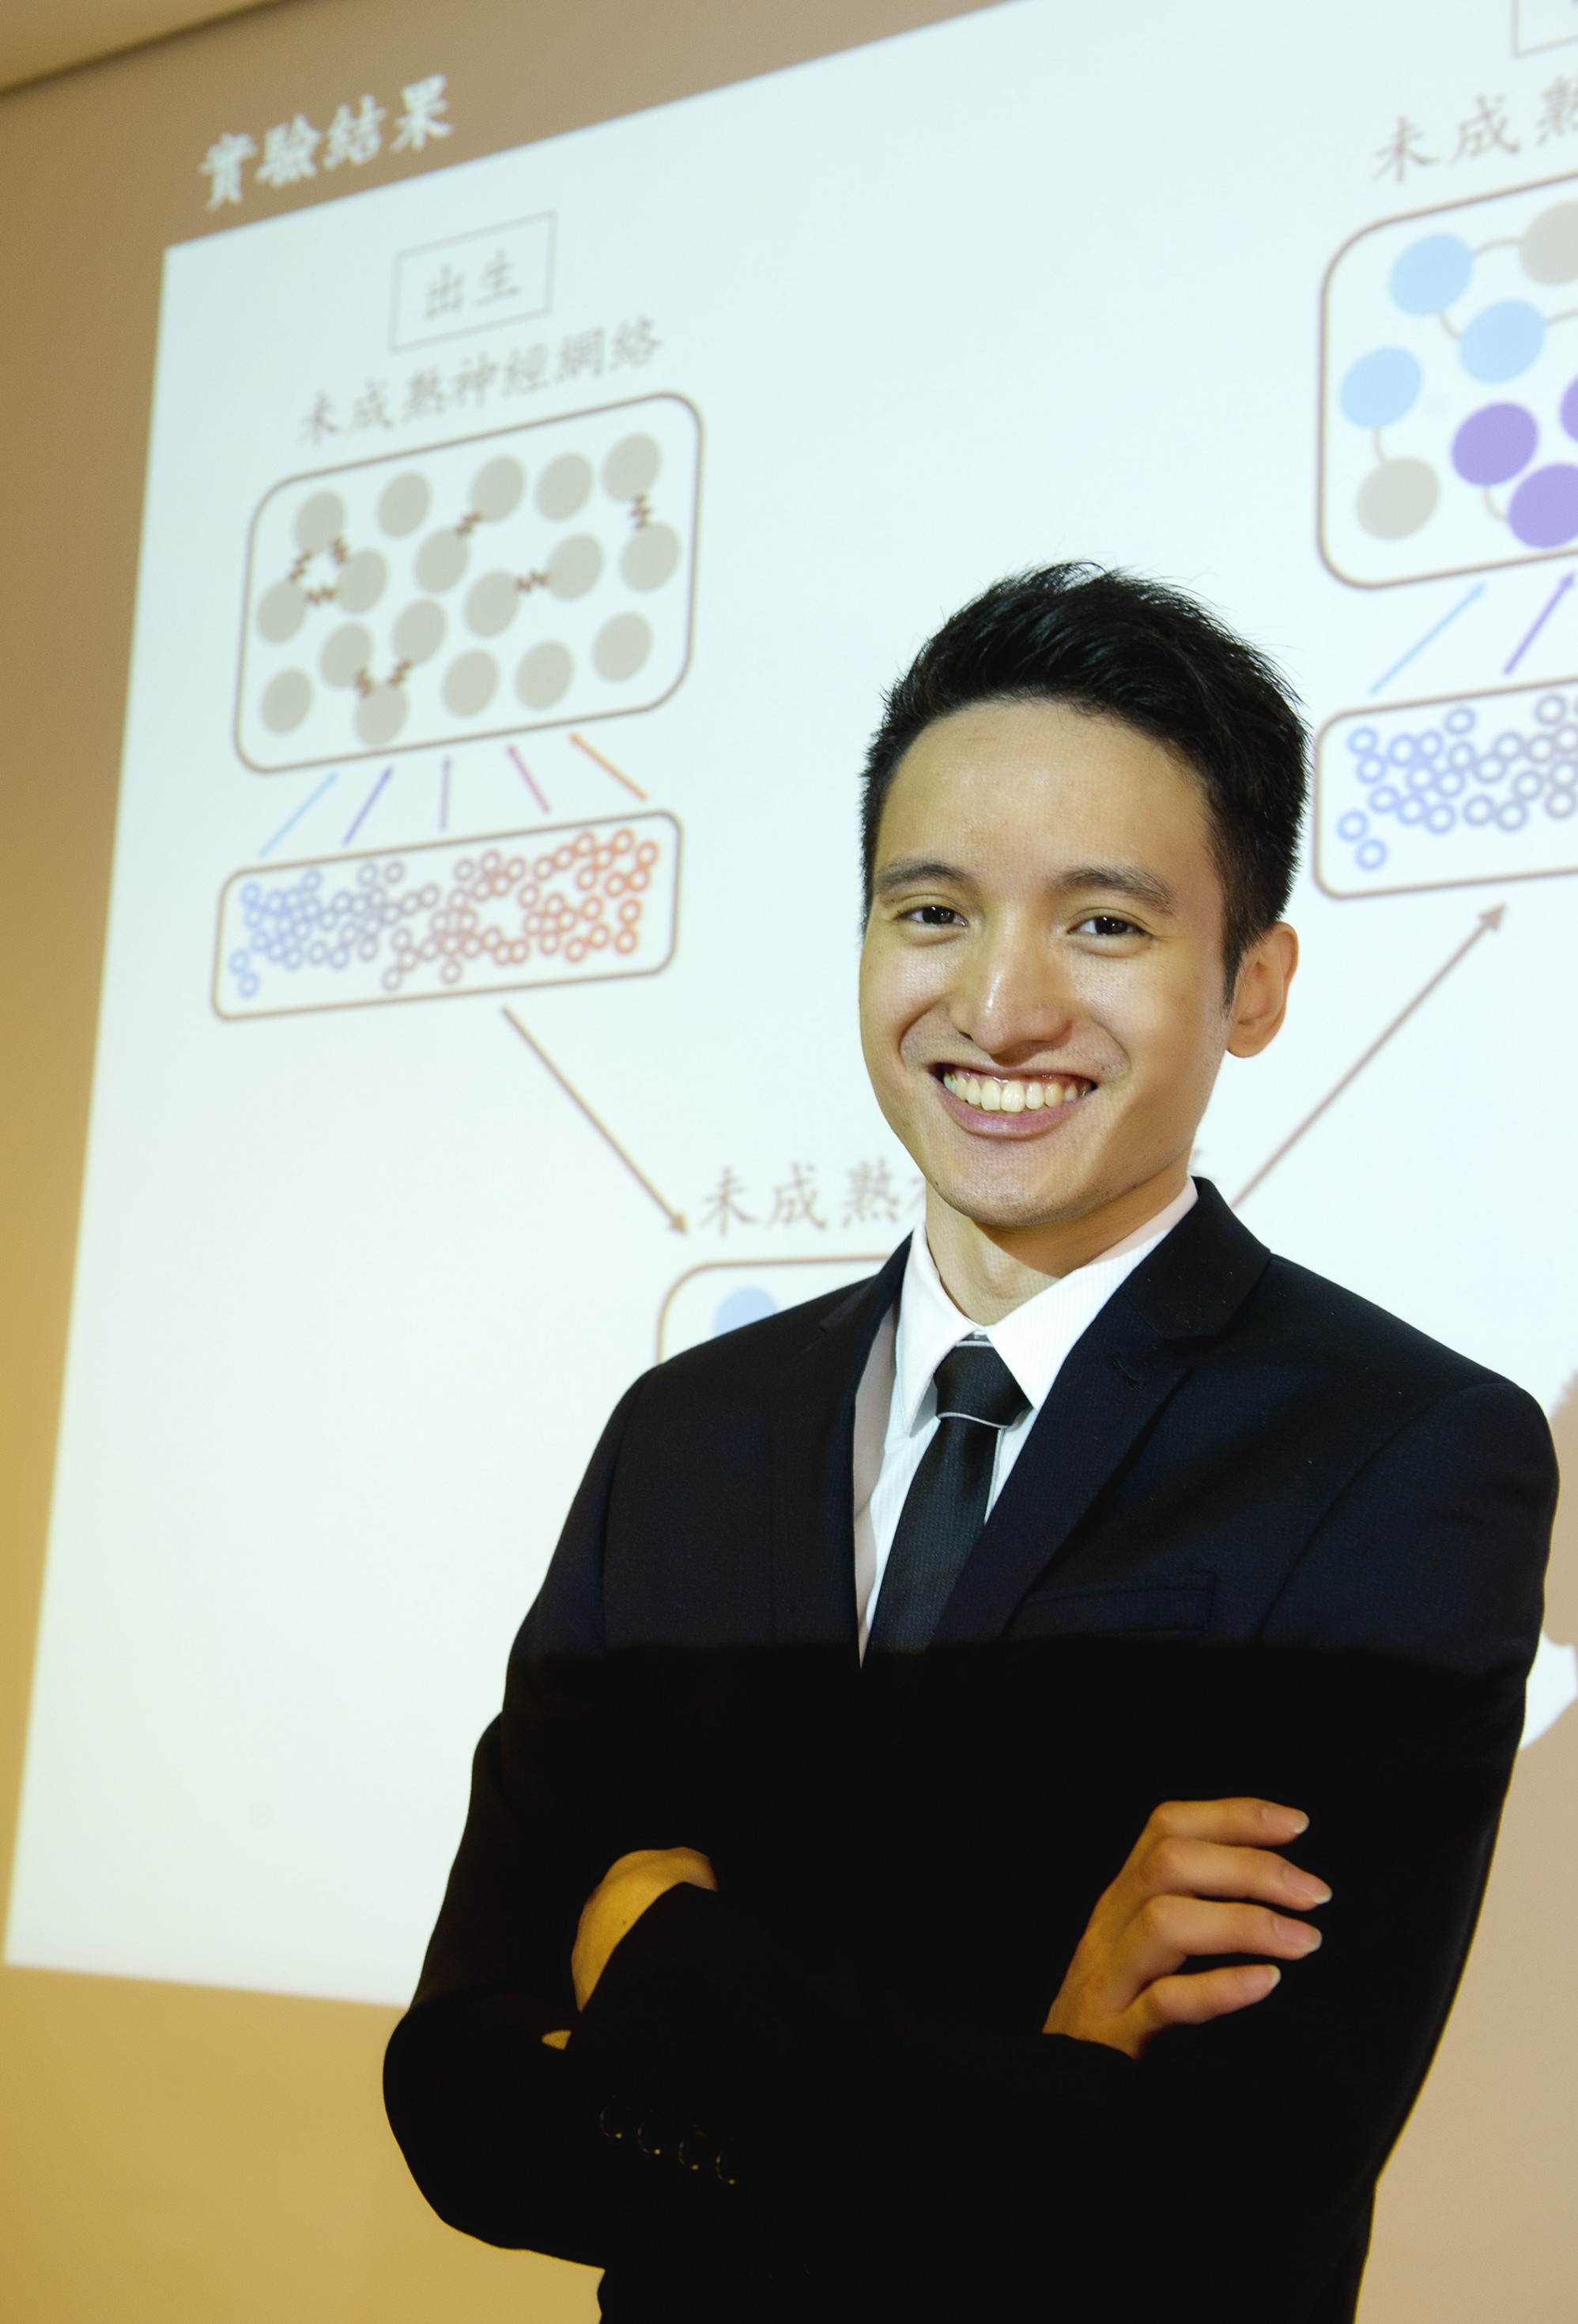 Dr. Owen KO Ho, MBChB Year 3 student, unraveled mystery of neuronal circuits development with his research findings recently published in prestigious scientific journal Nature (April 2013).